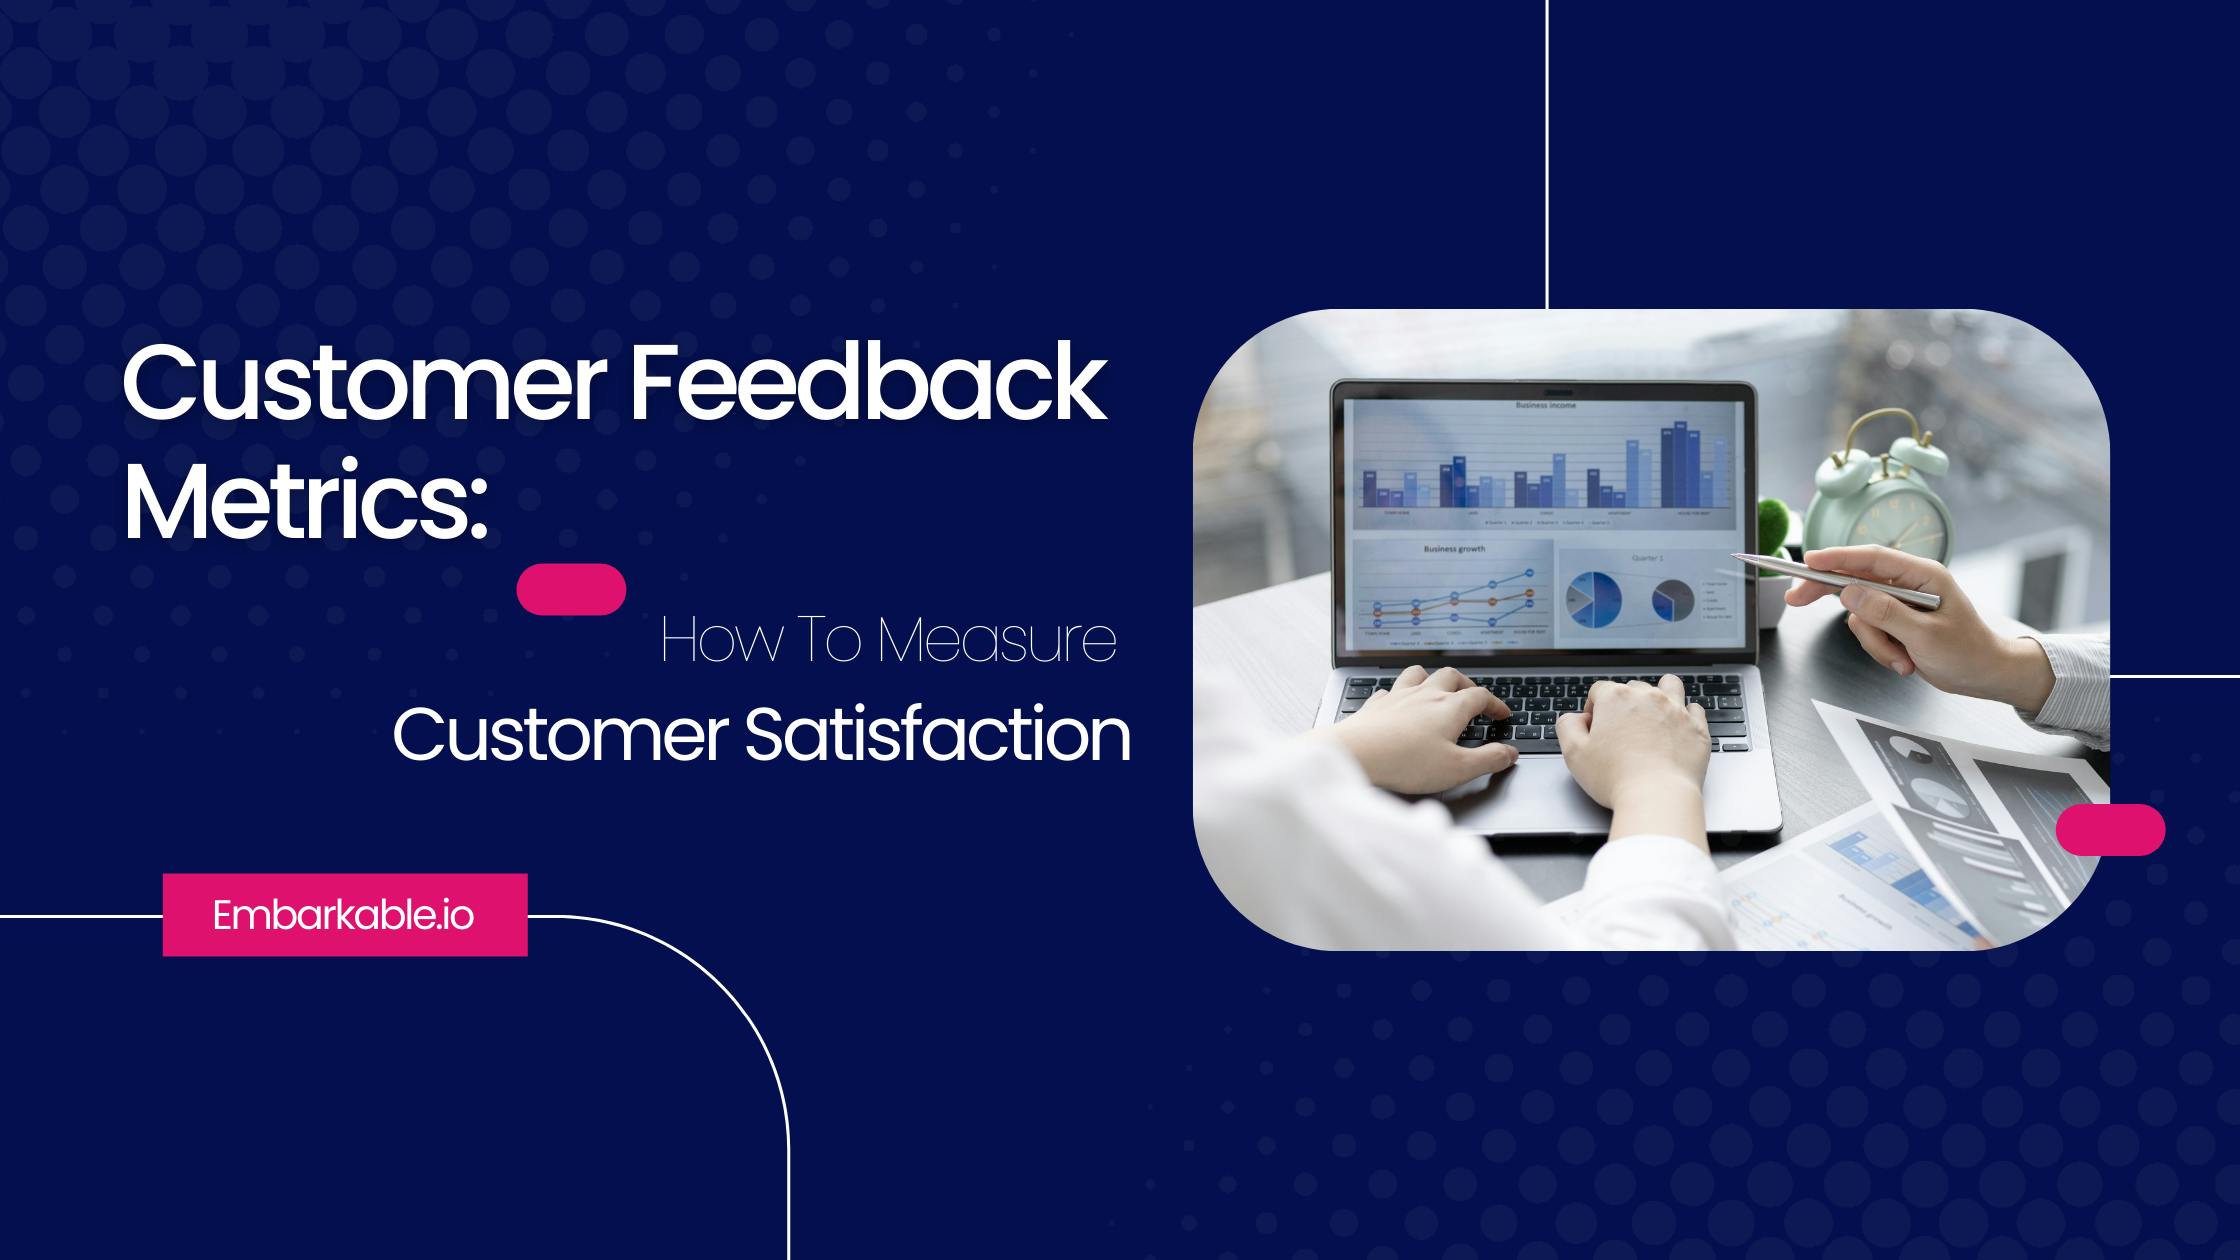 Customer feedback metrics are used to measure customer satisfaction and the success of your product. Here are some of the most important metrics you should track.